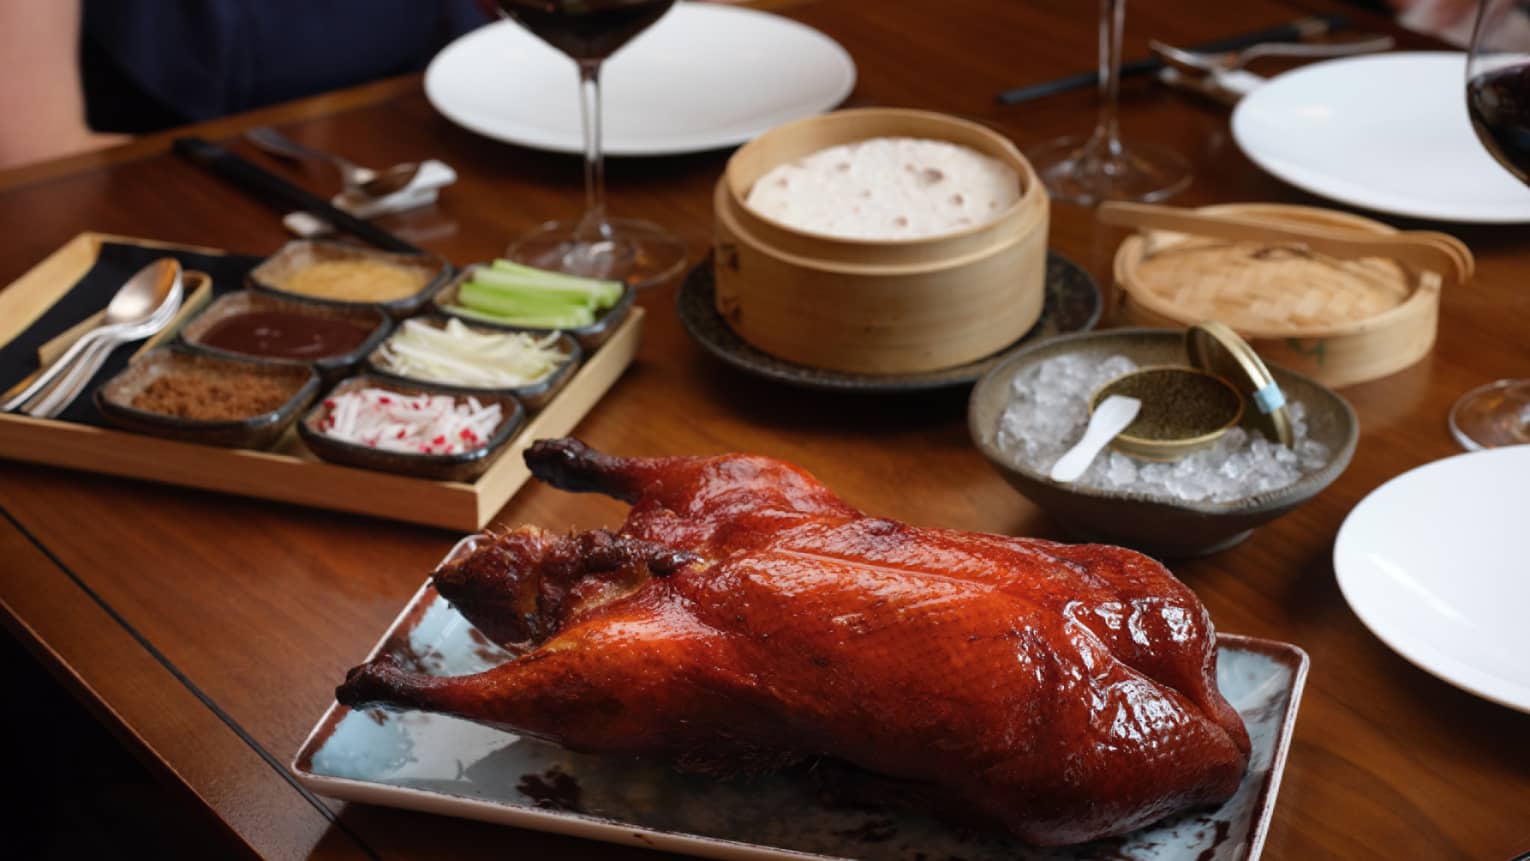 Roasted duck on a table.